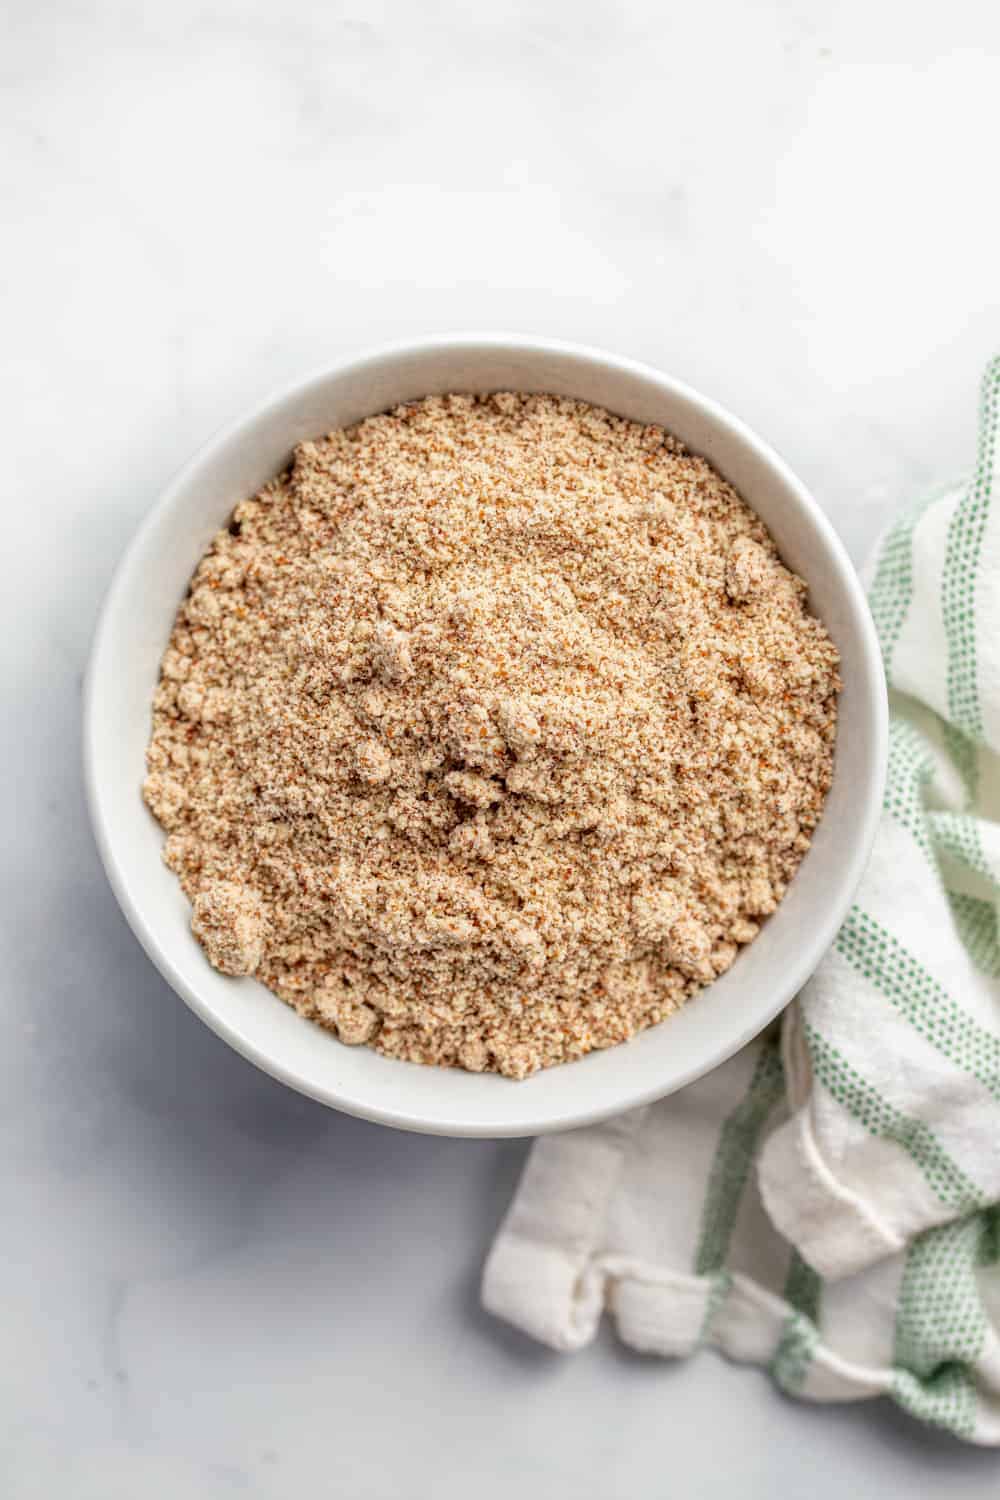 Finely ground almond meal in a white bowl next to a dish towel